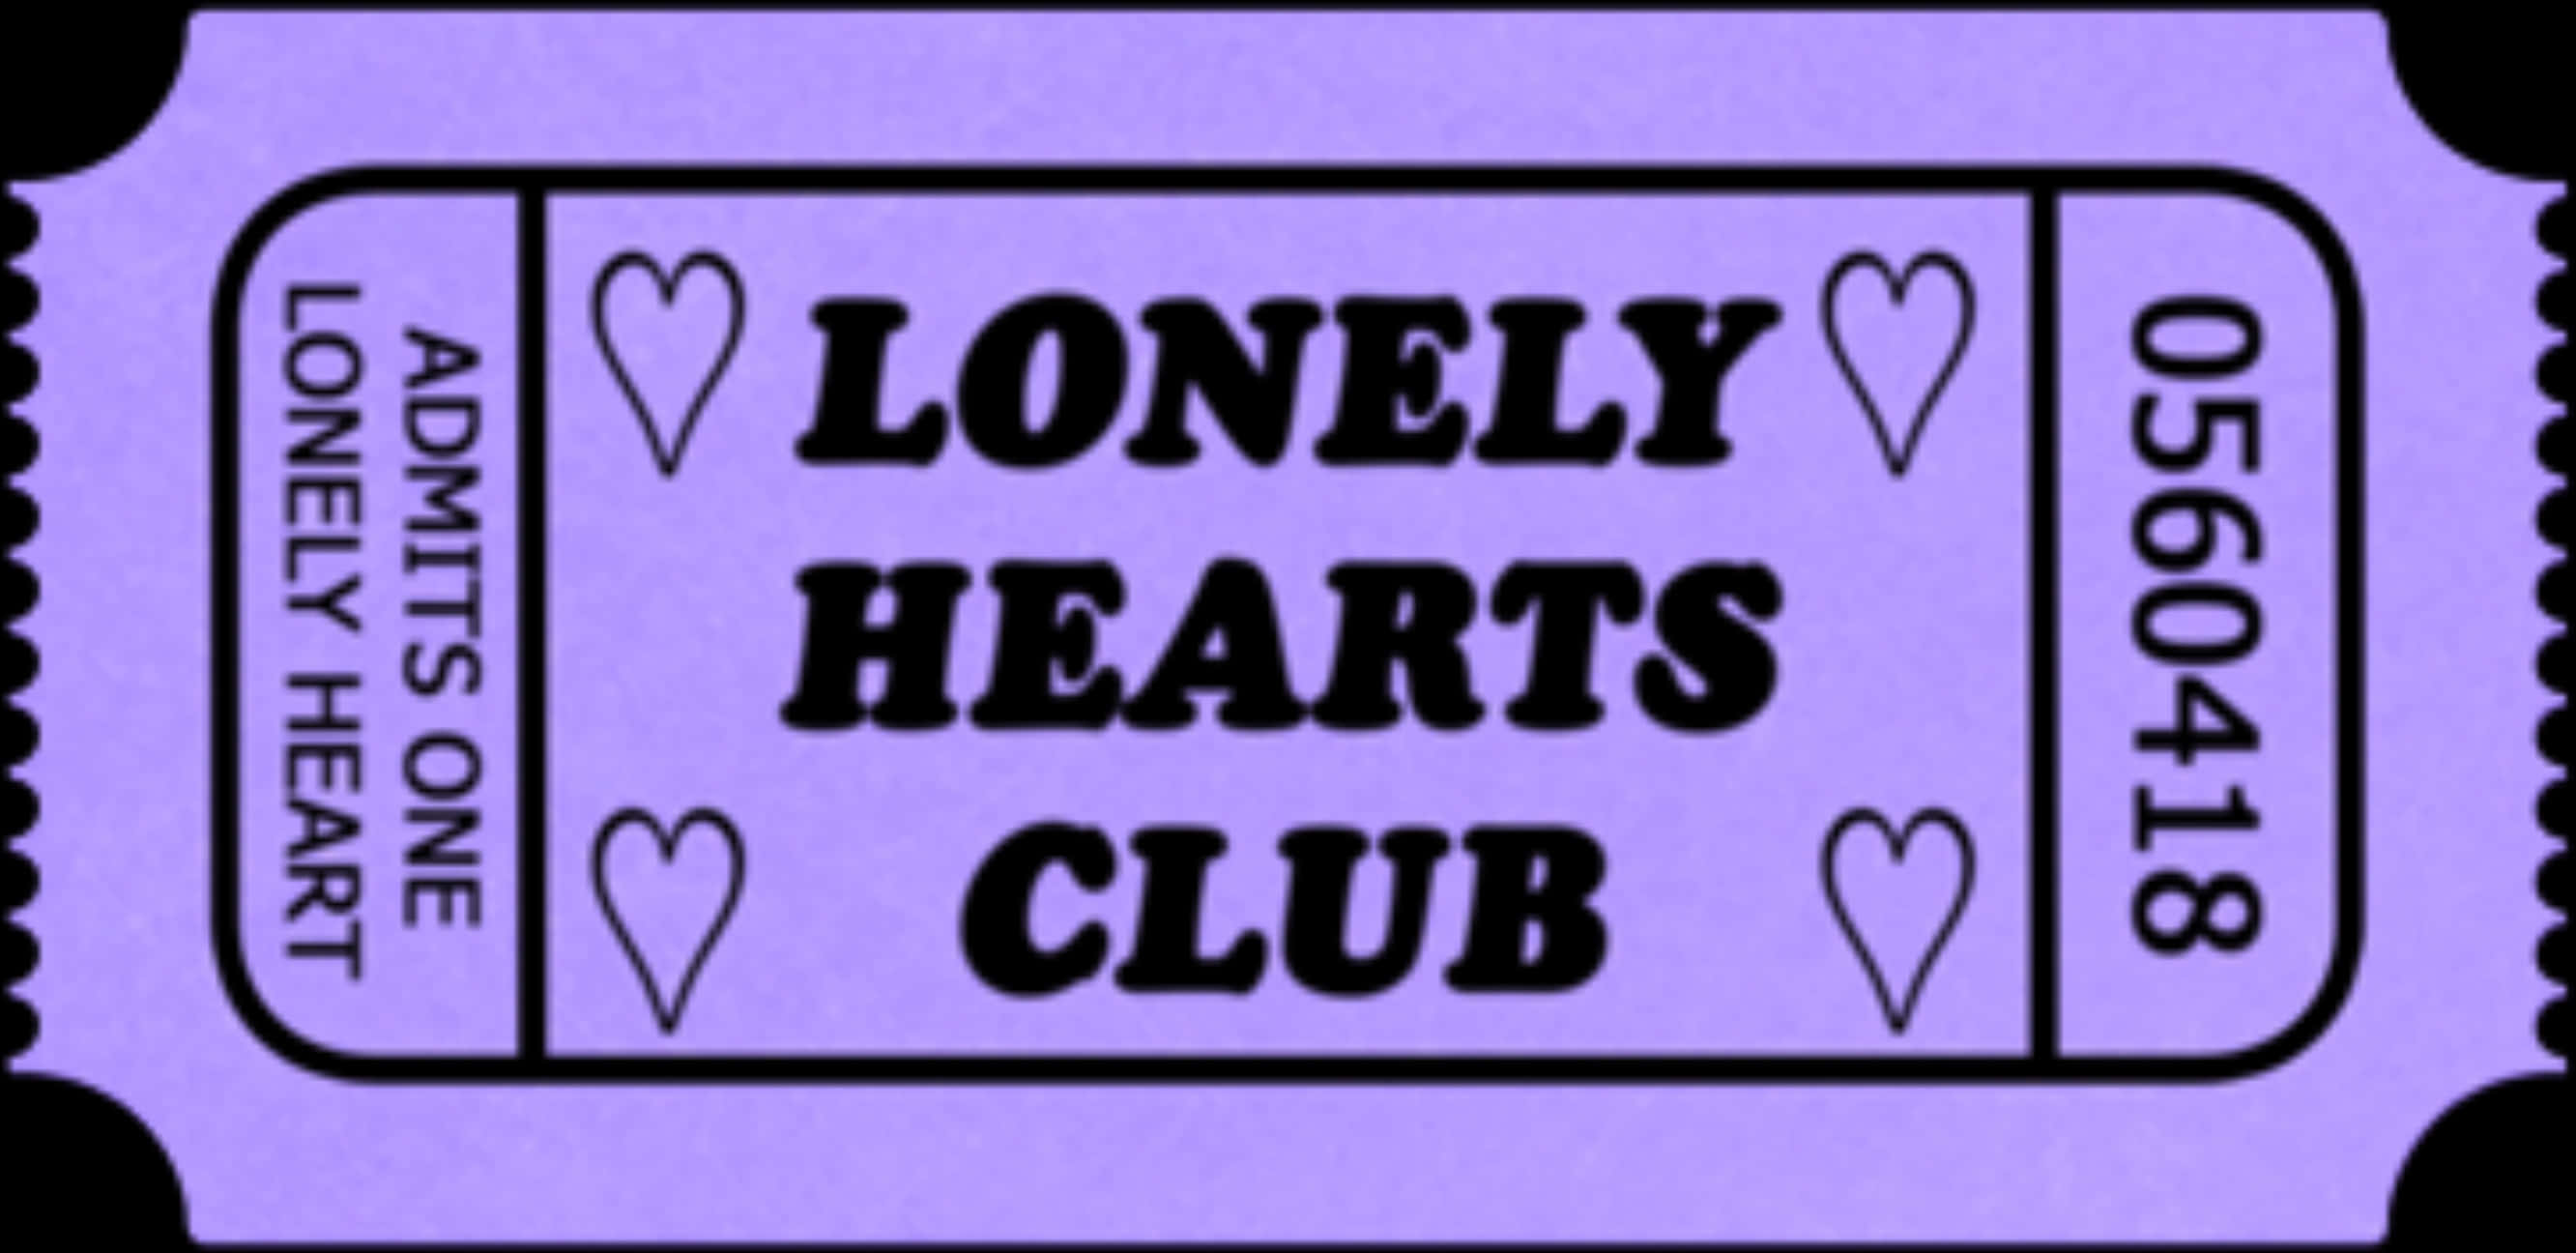 Lonely Hearts Club Ticket Overlay